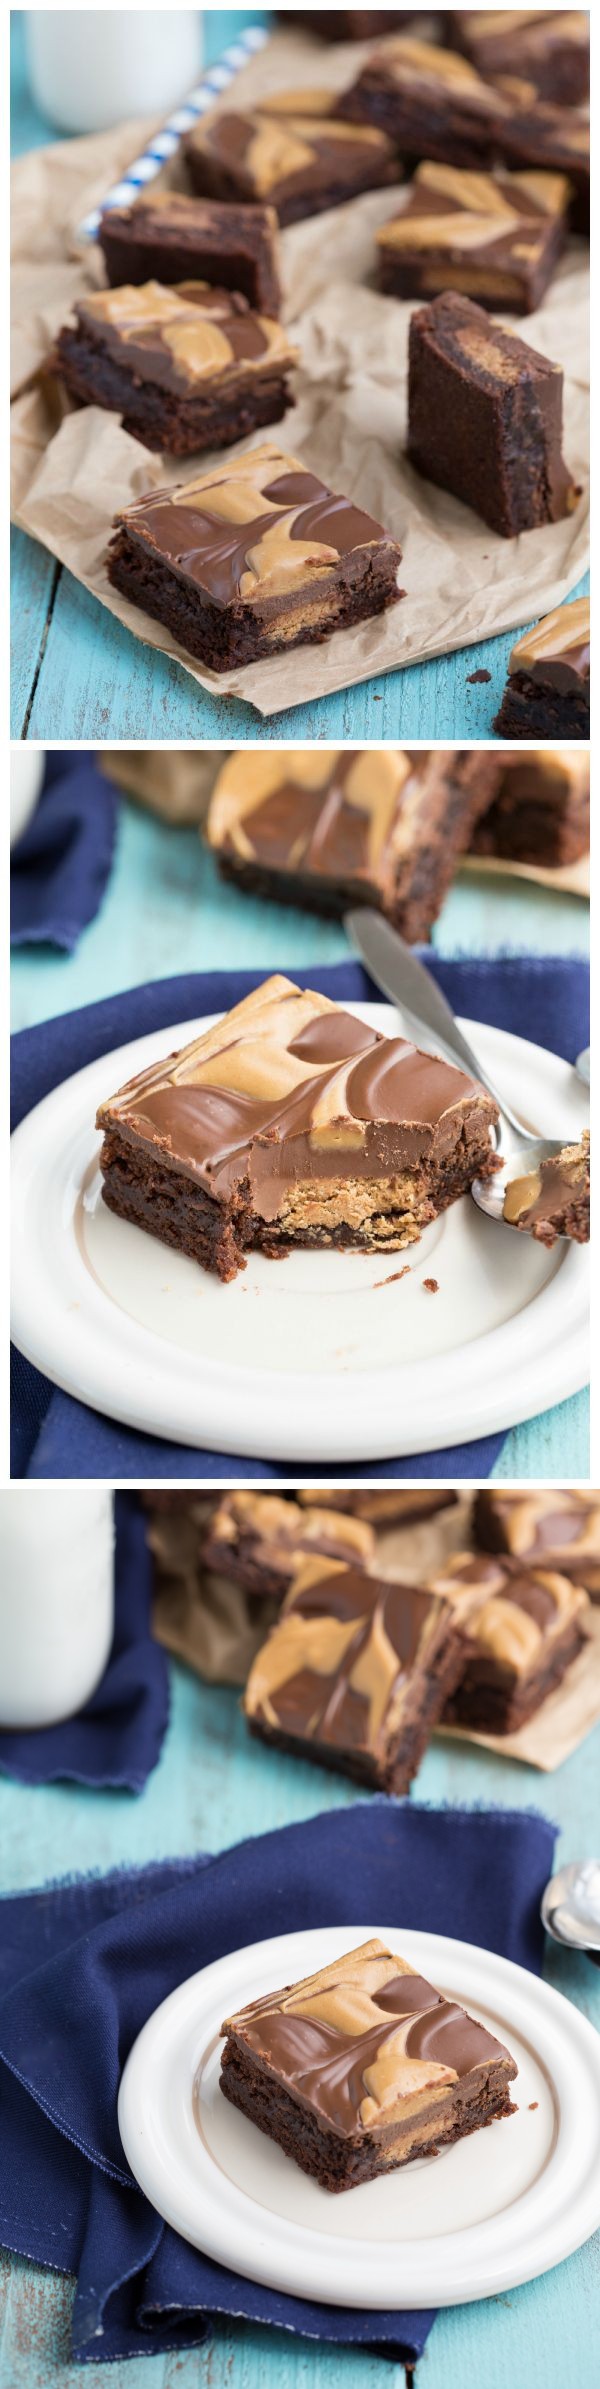 Double-Layered Peanut Butter Cup Brownies